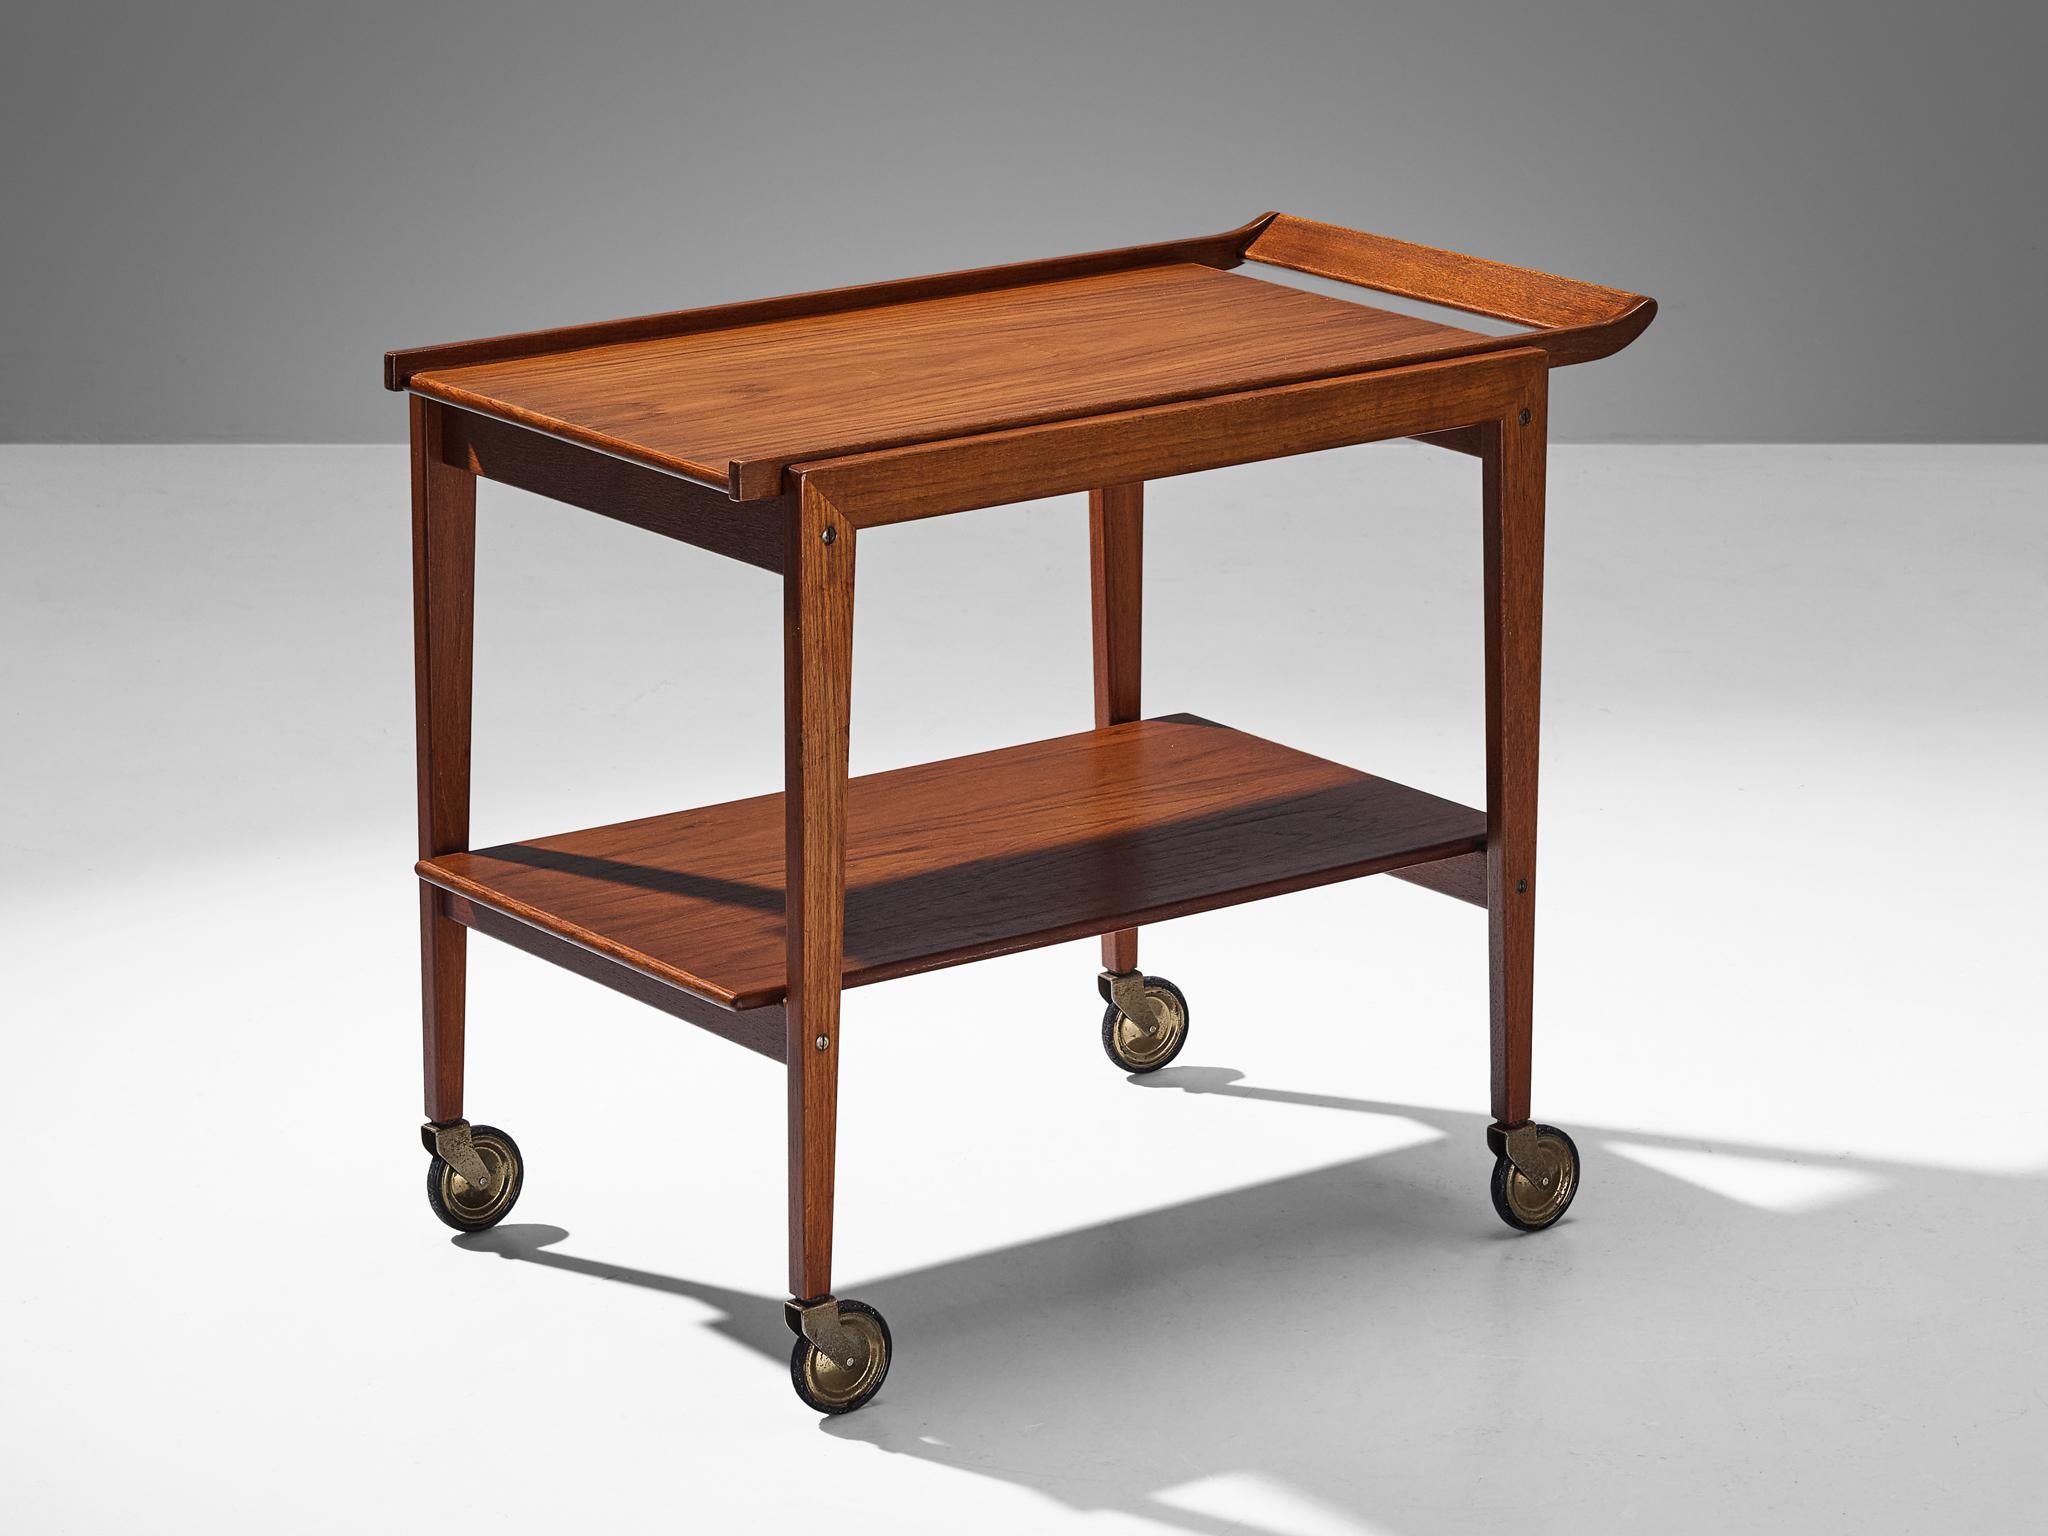 Trolley or bar cart, teak, metal, Europe, 1960s.

This elegant bar cart is executed in teak. The piece has a solid wooden frame and two shelves. The piece contains four wheels so it can be used as a trolley. The natural materials form a modest